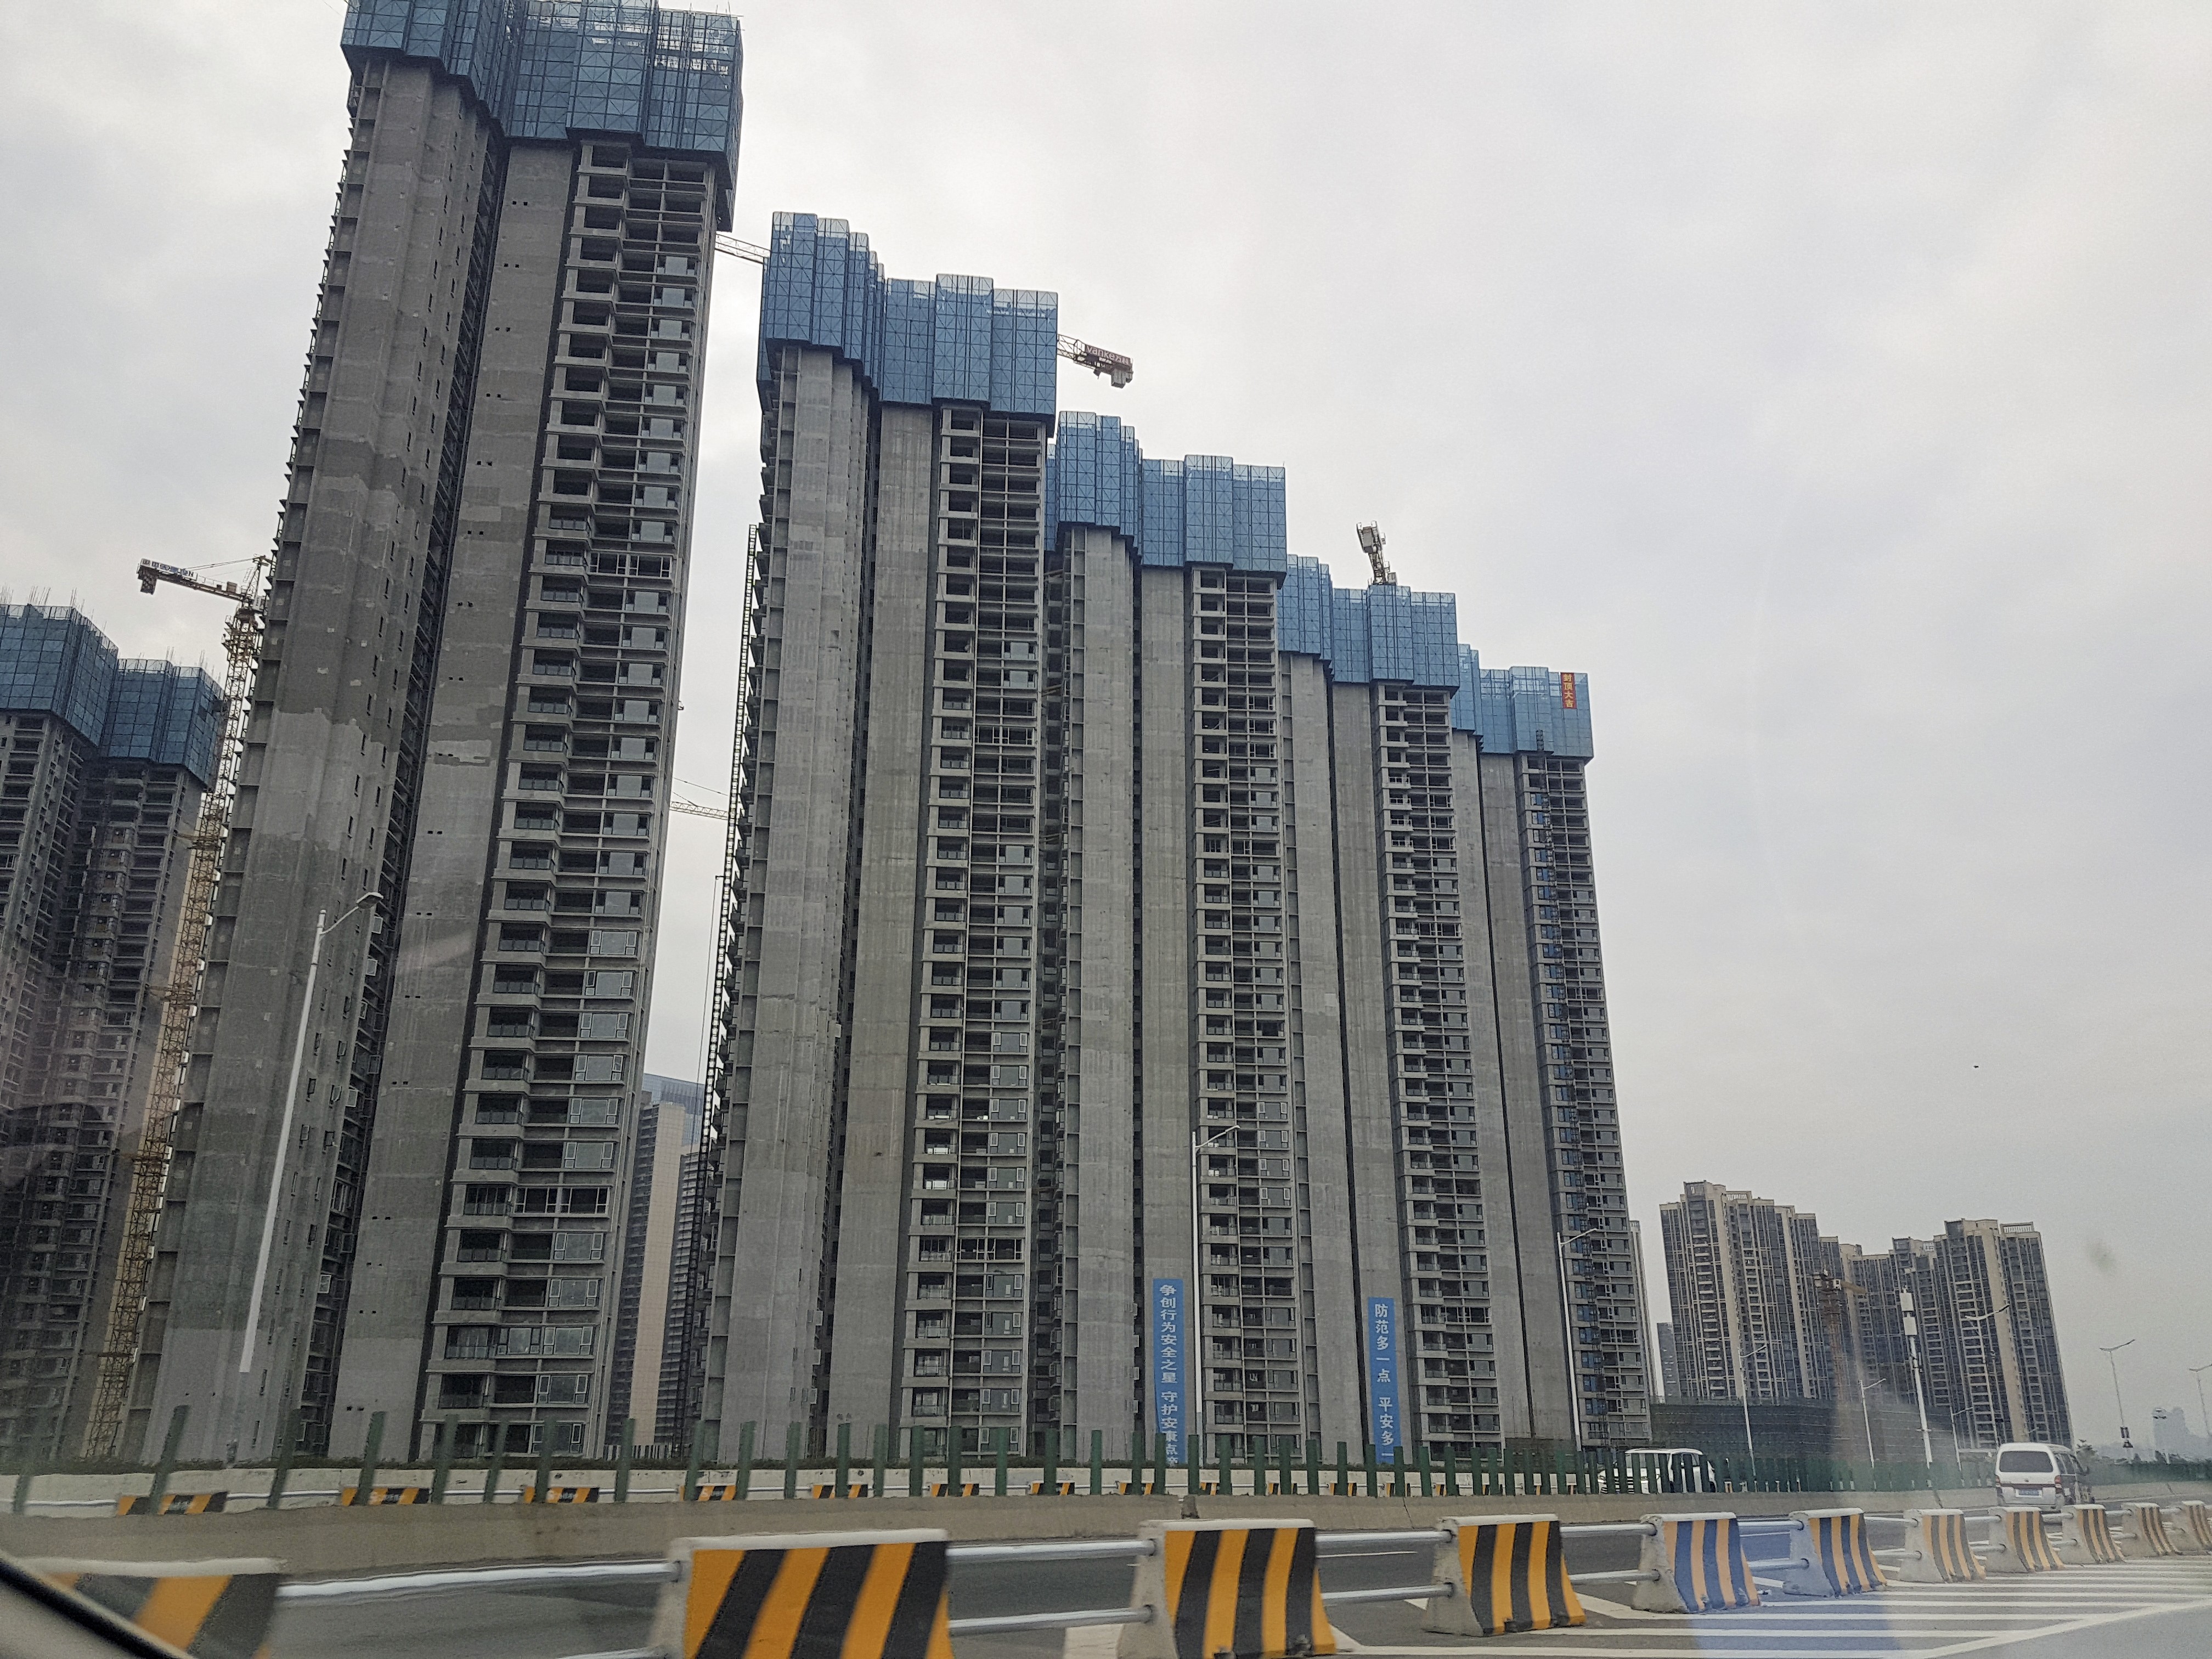 Land sales revenue in China is equivalent to more than half of local governments’ fiscal revenue. Photo: Martin Williams